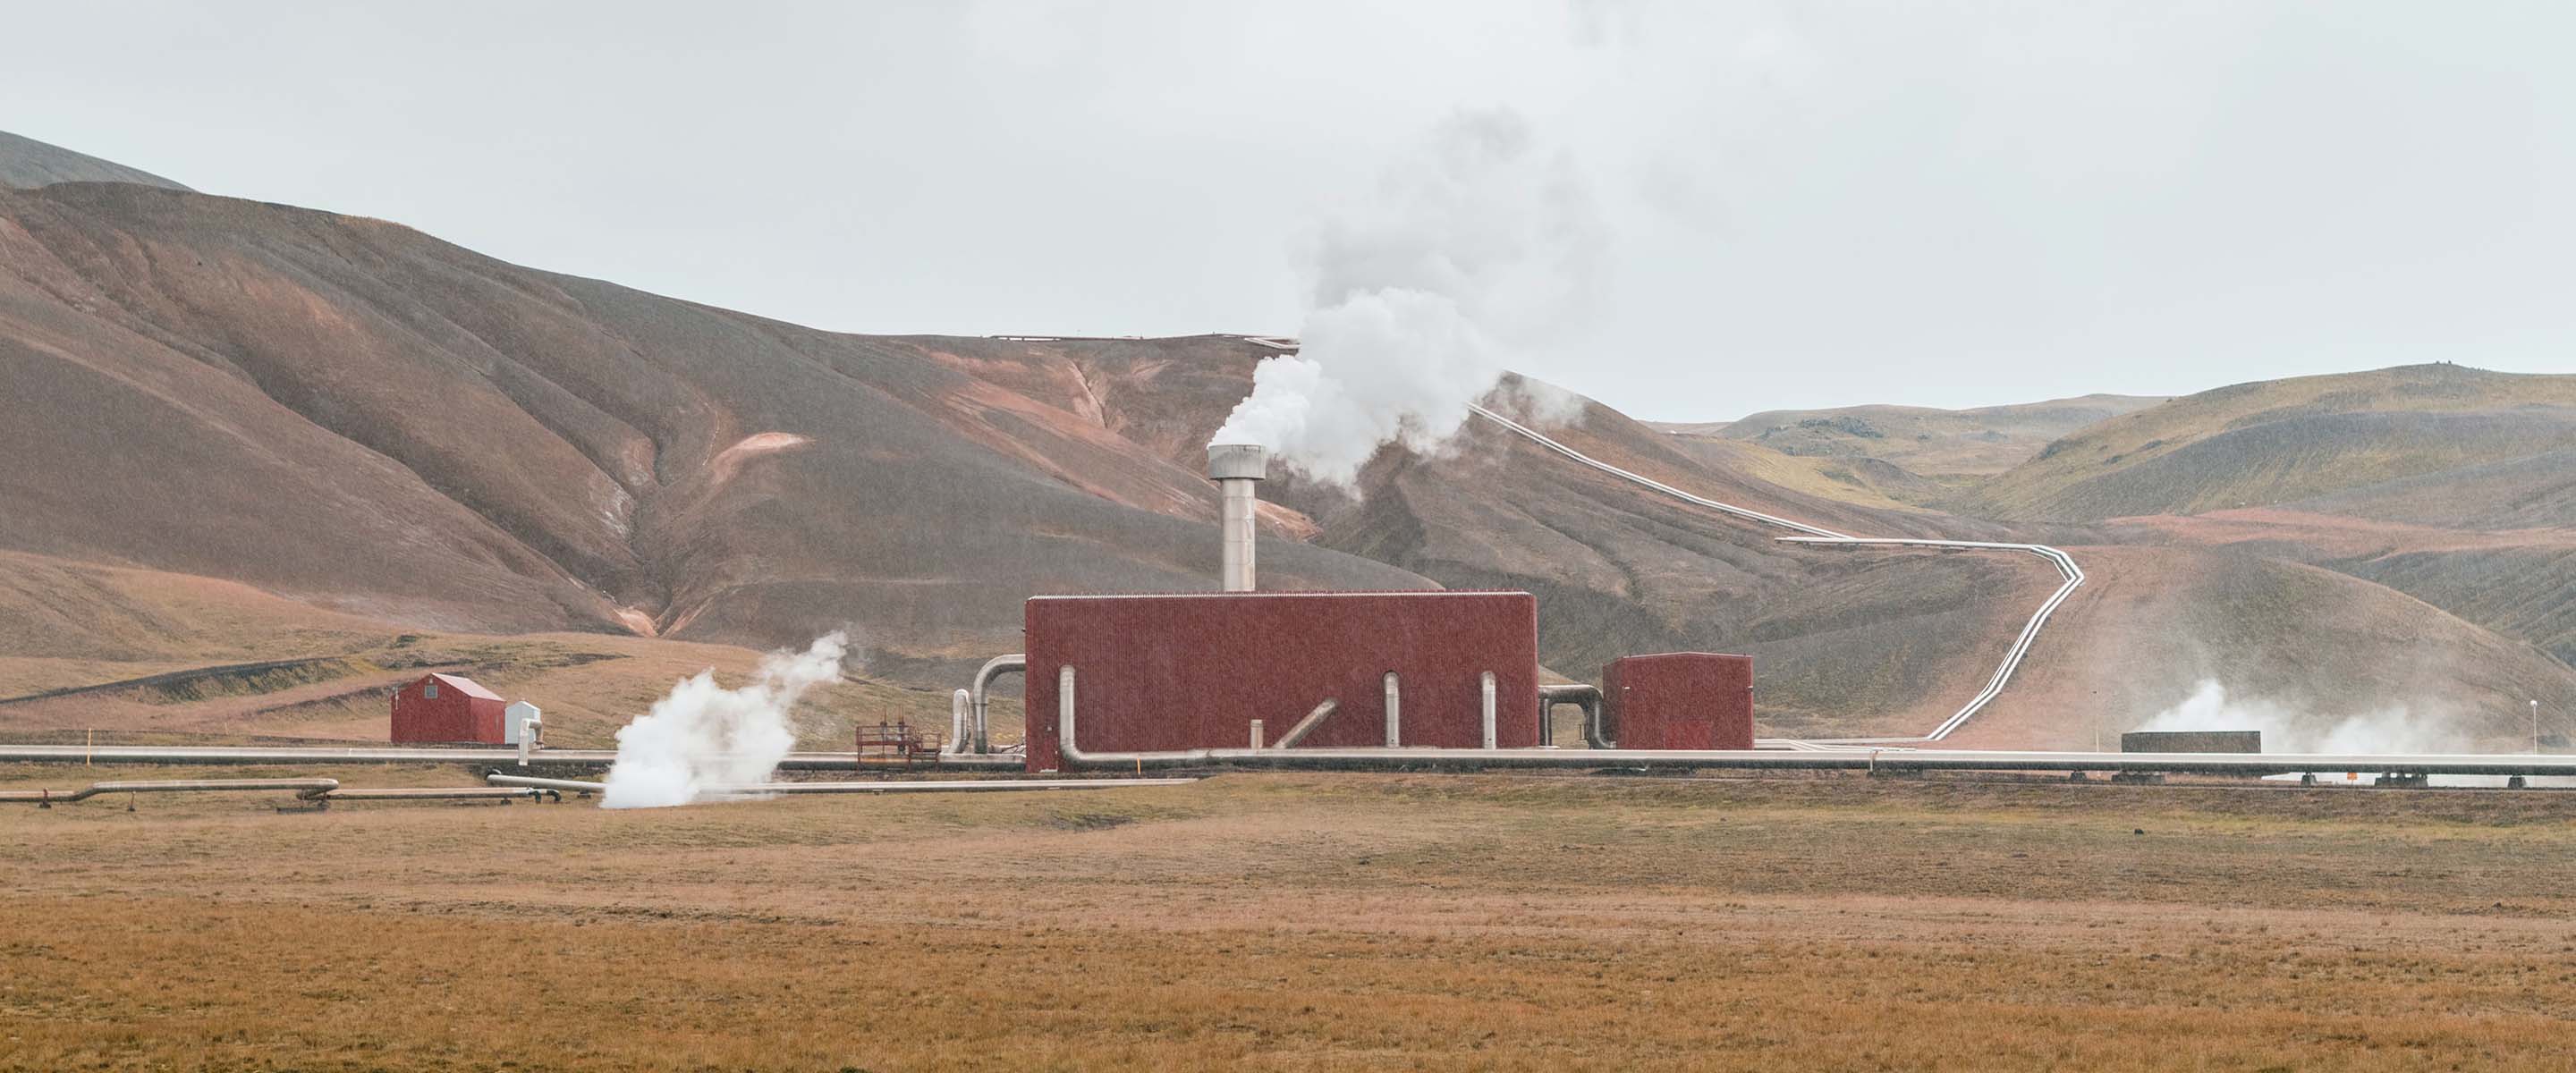 This geothermal plant in iceland is an example of a project with additionality.